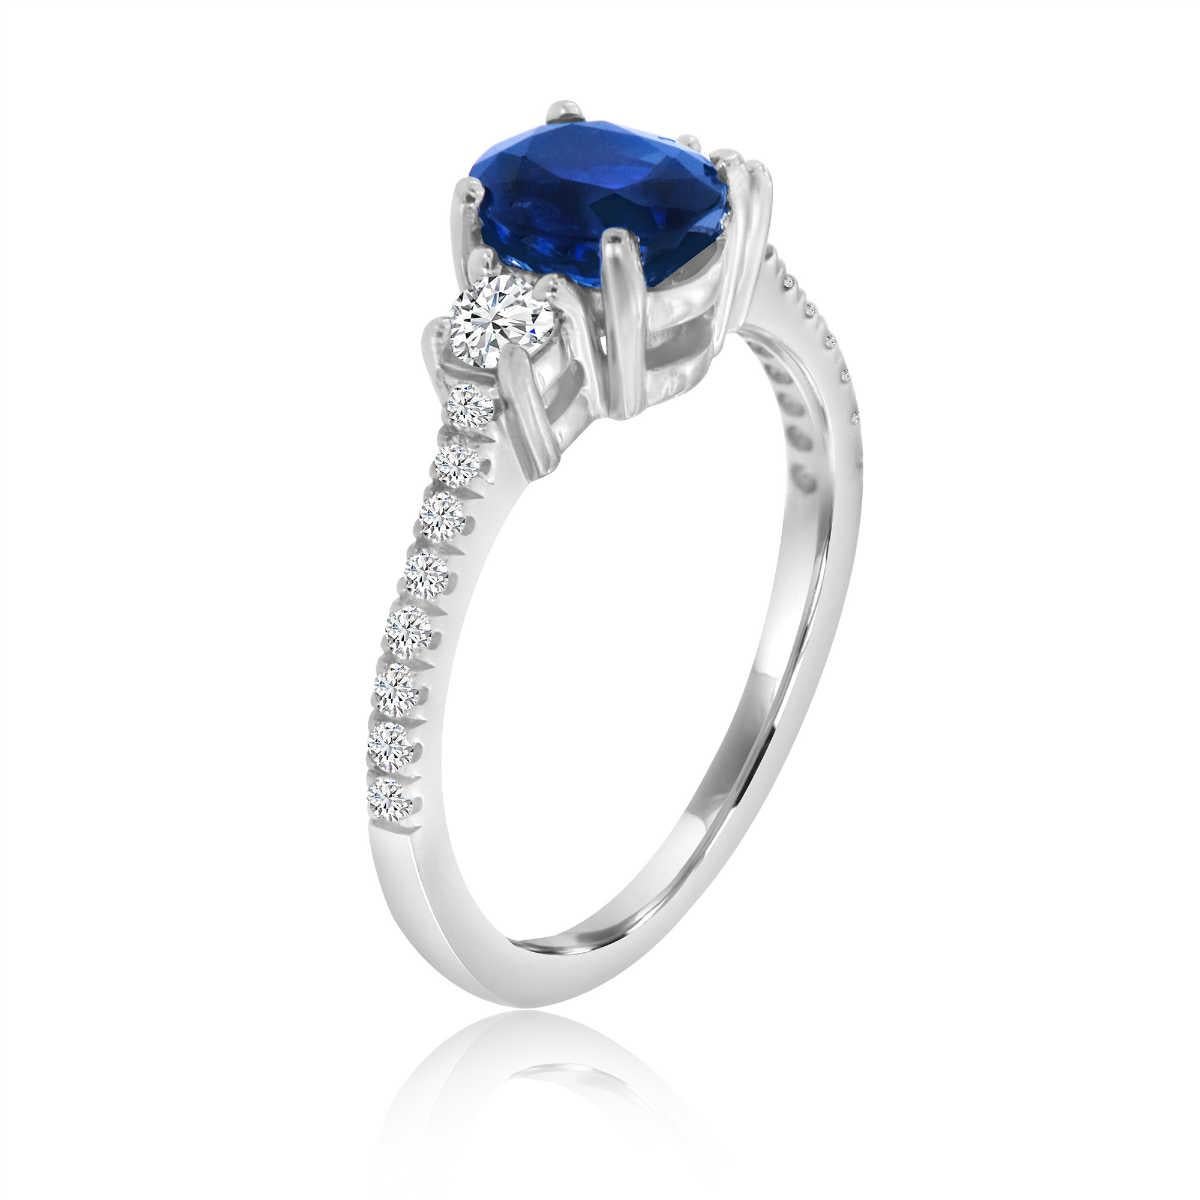 This delicate ring features 1.21 Carat Oval Shape sapphire flanked by two brilliant round diamonds in a total weight of 0.18 carat. A scalloped micro-prong set diamonds in total carat weight of 0.14 carat add a dazzling effect. Experience the